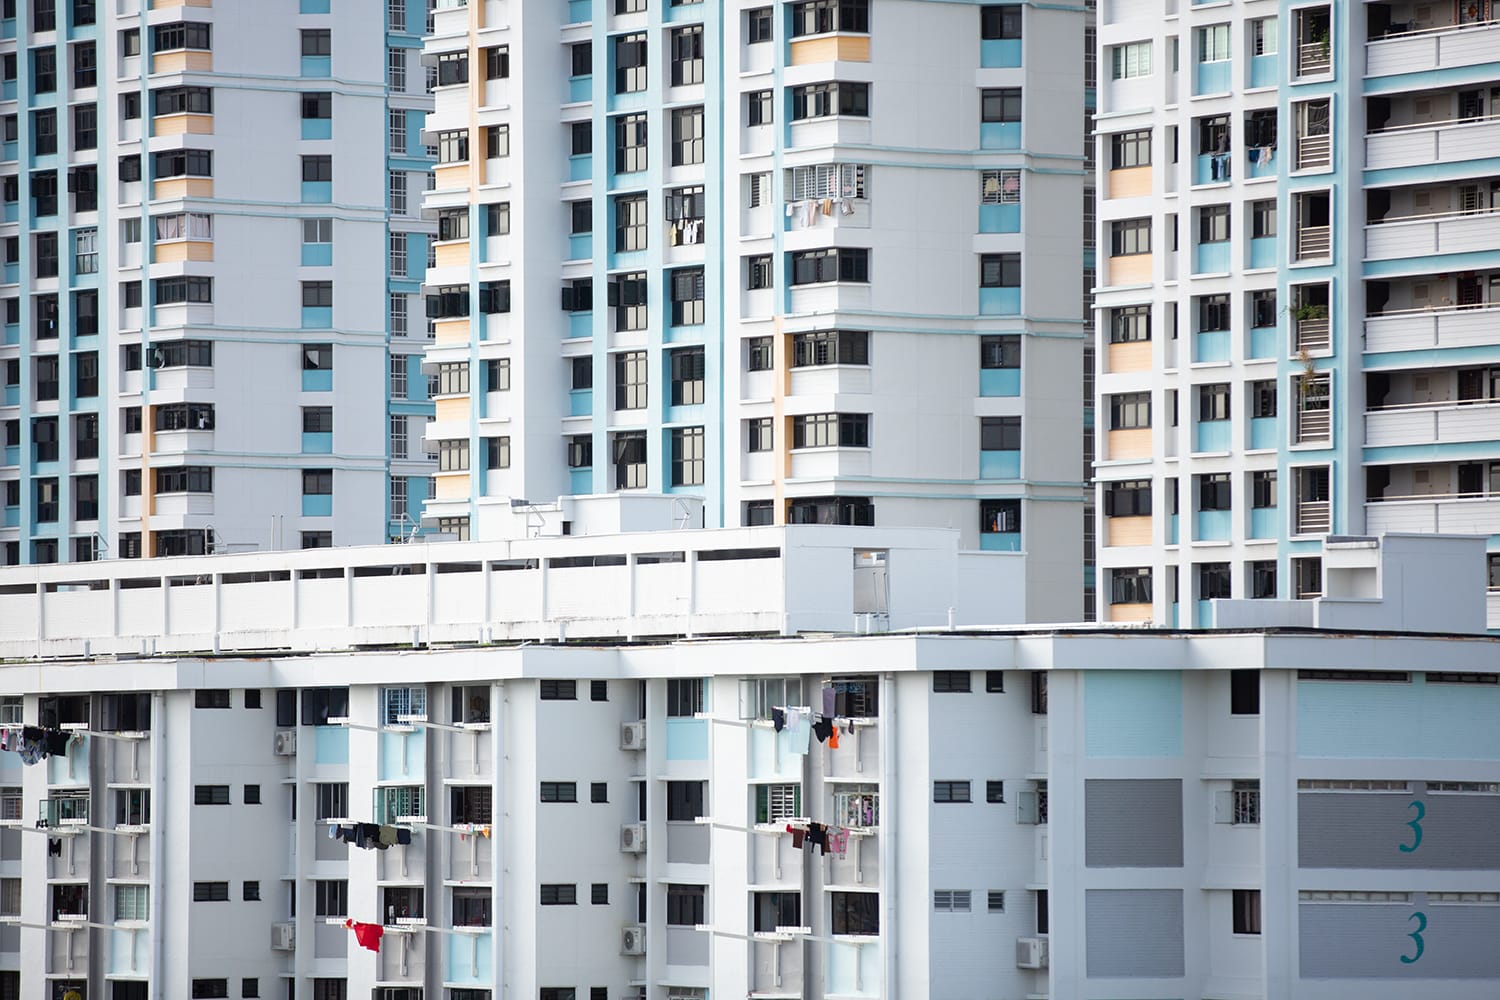 Member of Parliament Murali Pillai suggested recentralising resources with the Housing & Development Board (HDB) and having it handle maintenance services as it did in the past.